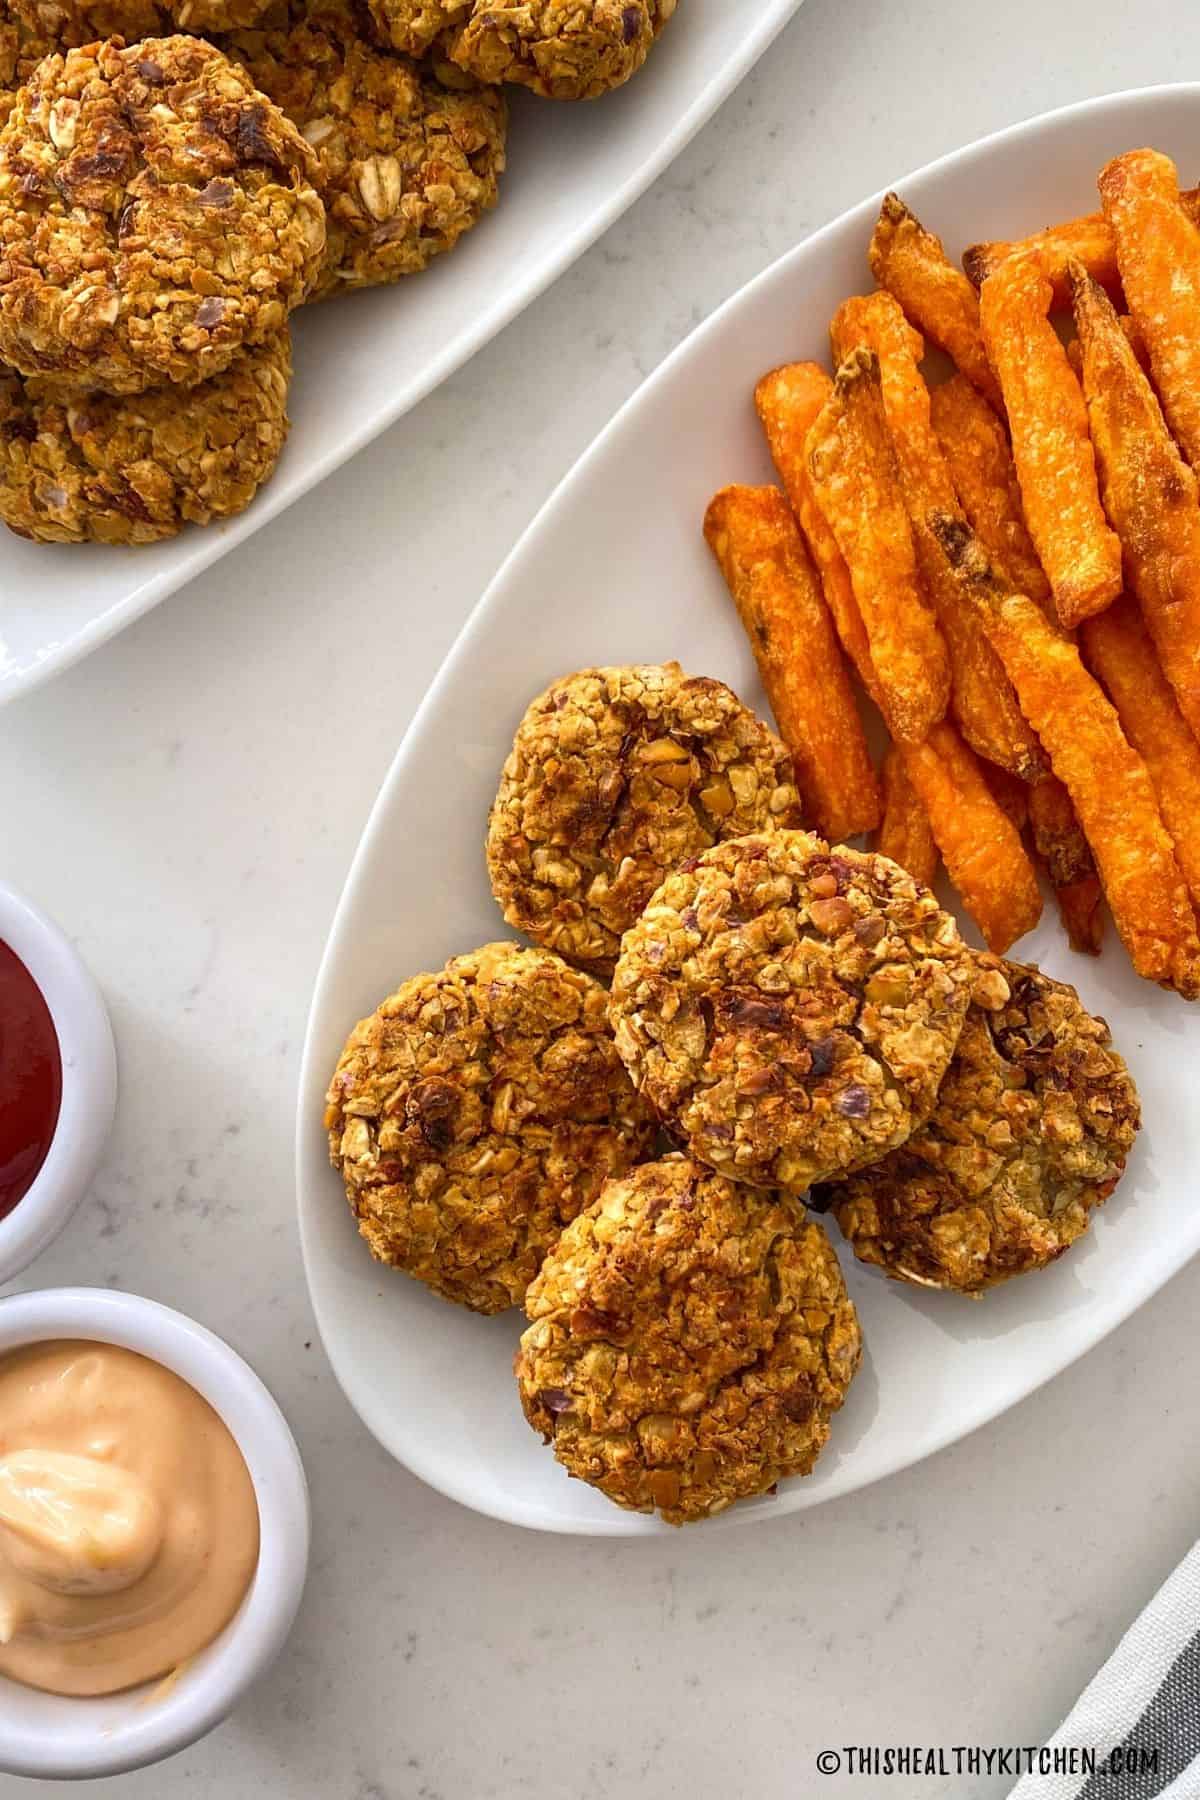 Chickpea nuggets in white dish with sweet potato fries beside it and dipping sauce on the side.